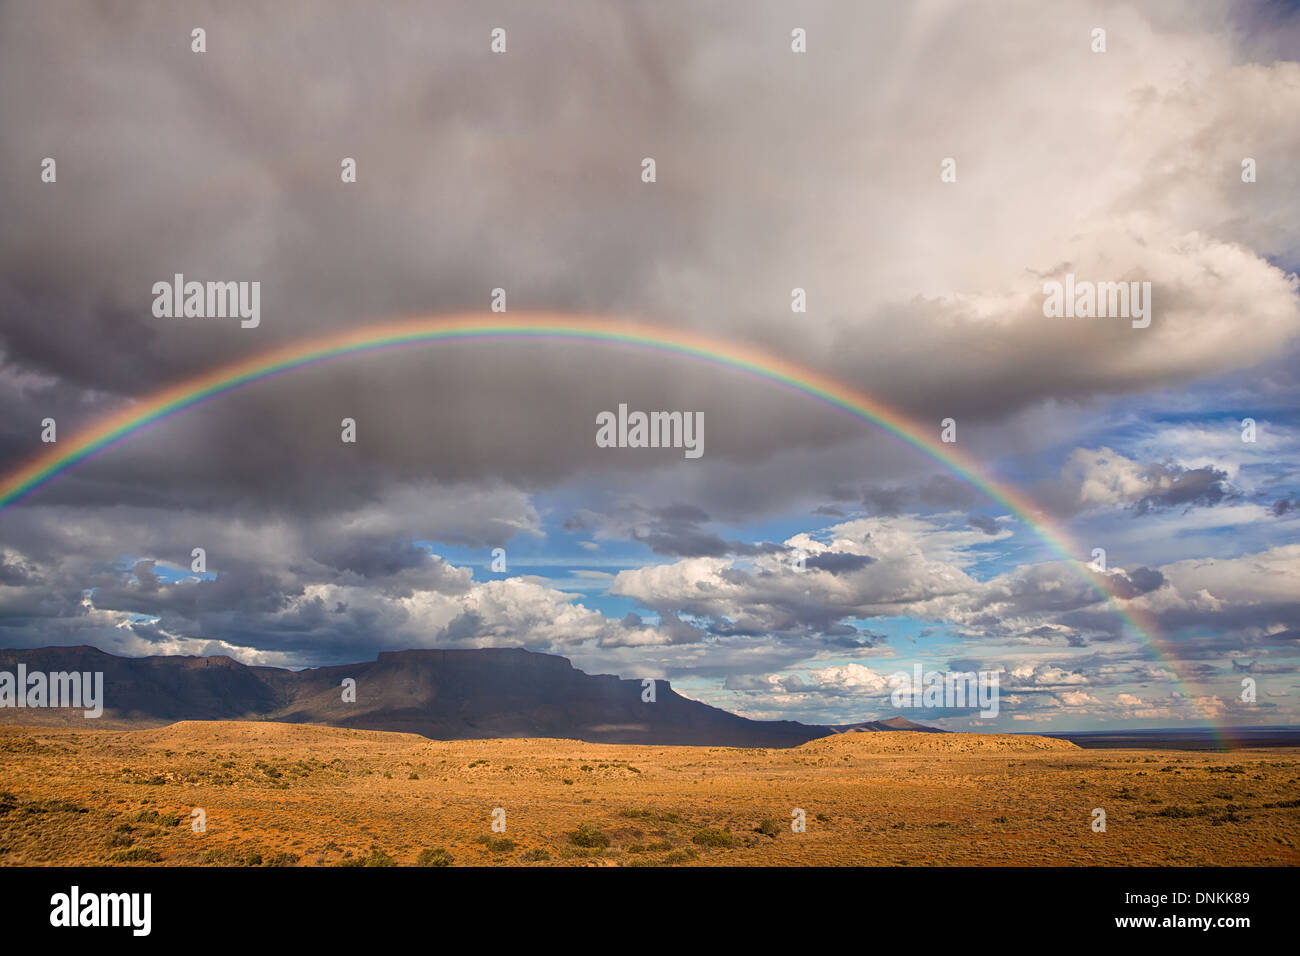 A rainbow over The Karoo National Park in South Africa. A rainbow over The Karoo National Park in South Africa. Stock Photo